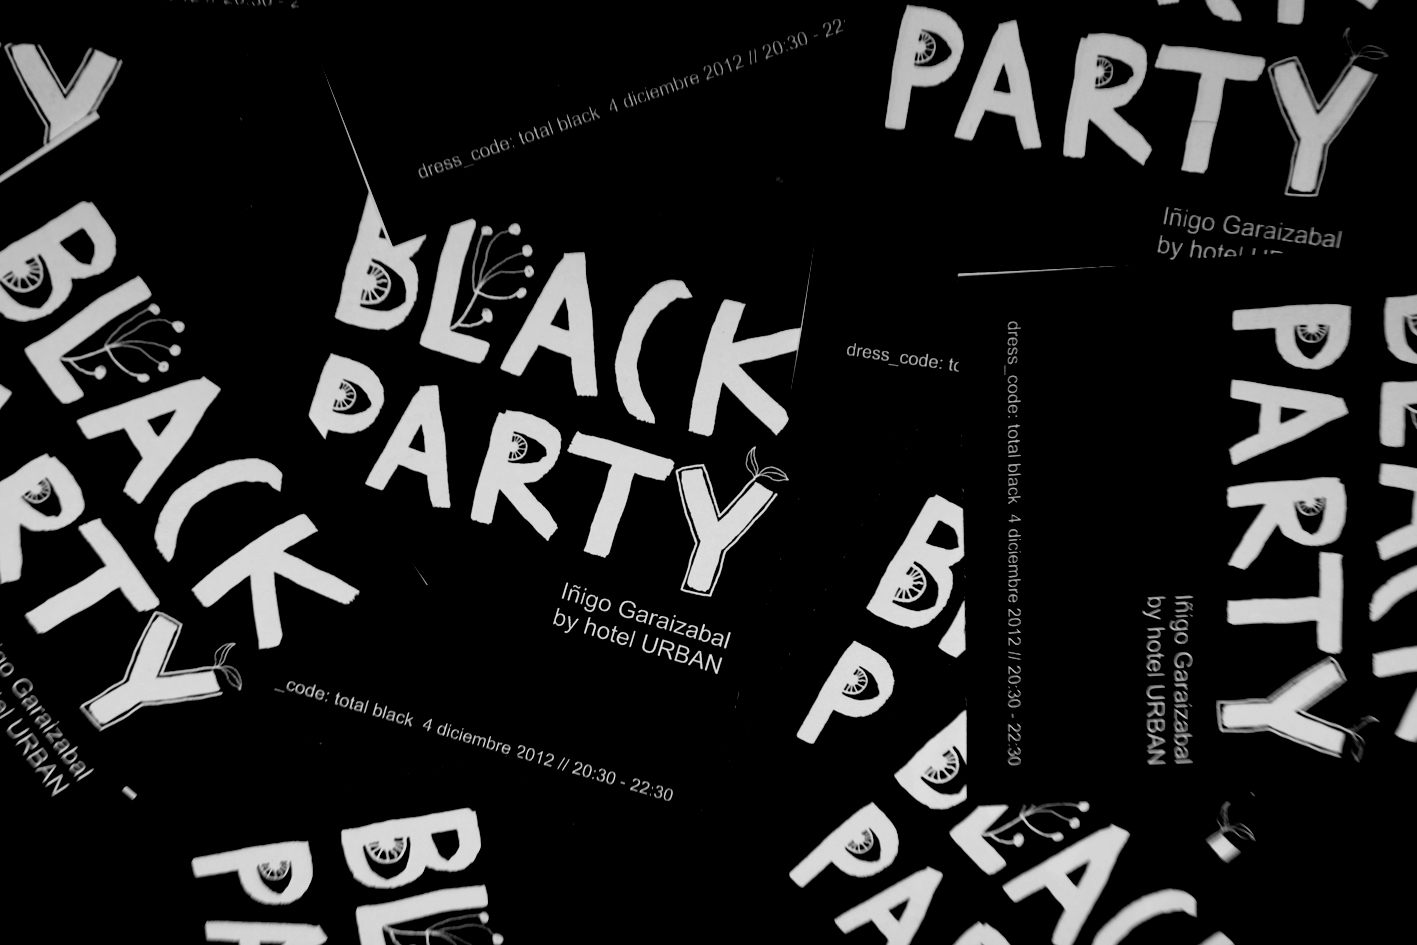 Black Party Derby Hotels Collection Blog Magazine